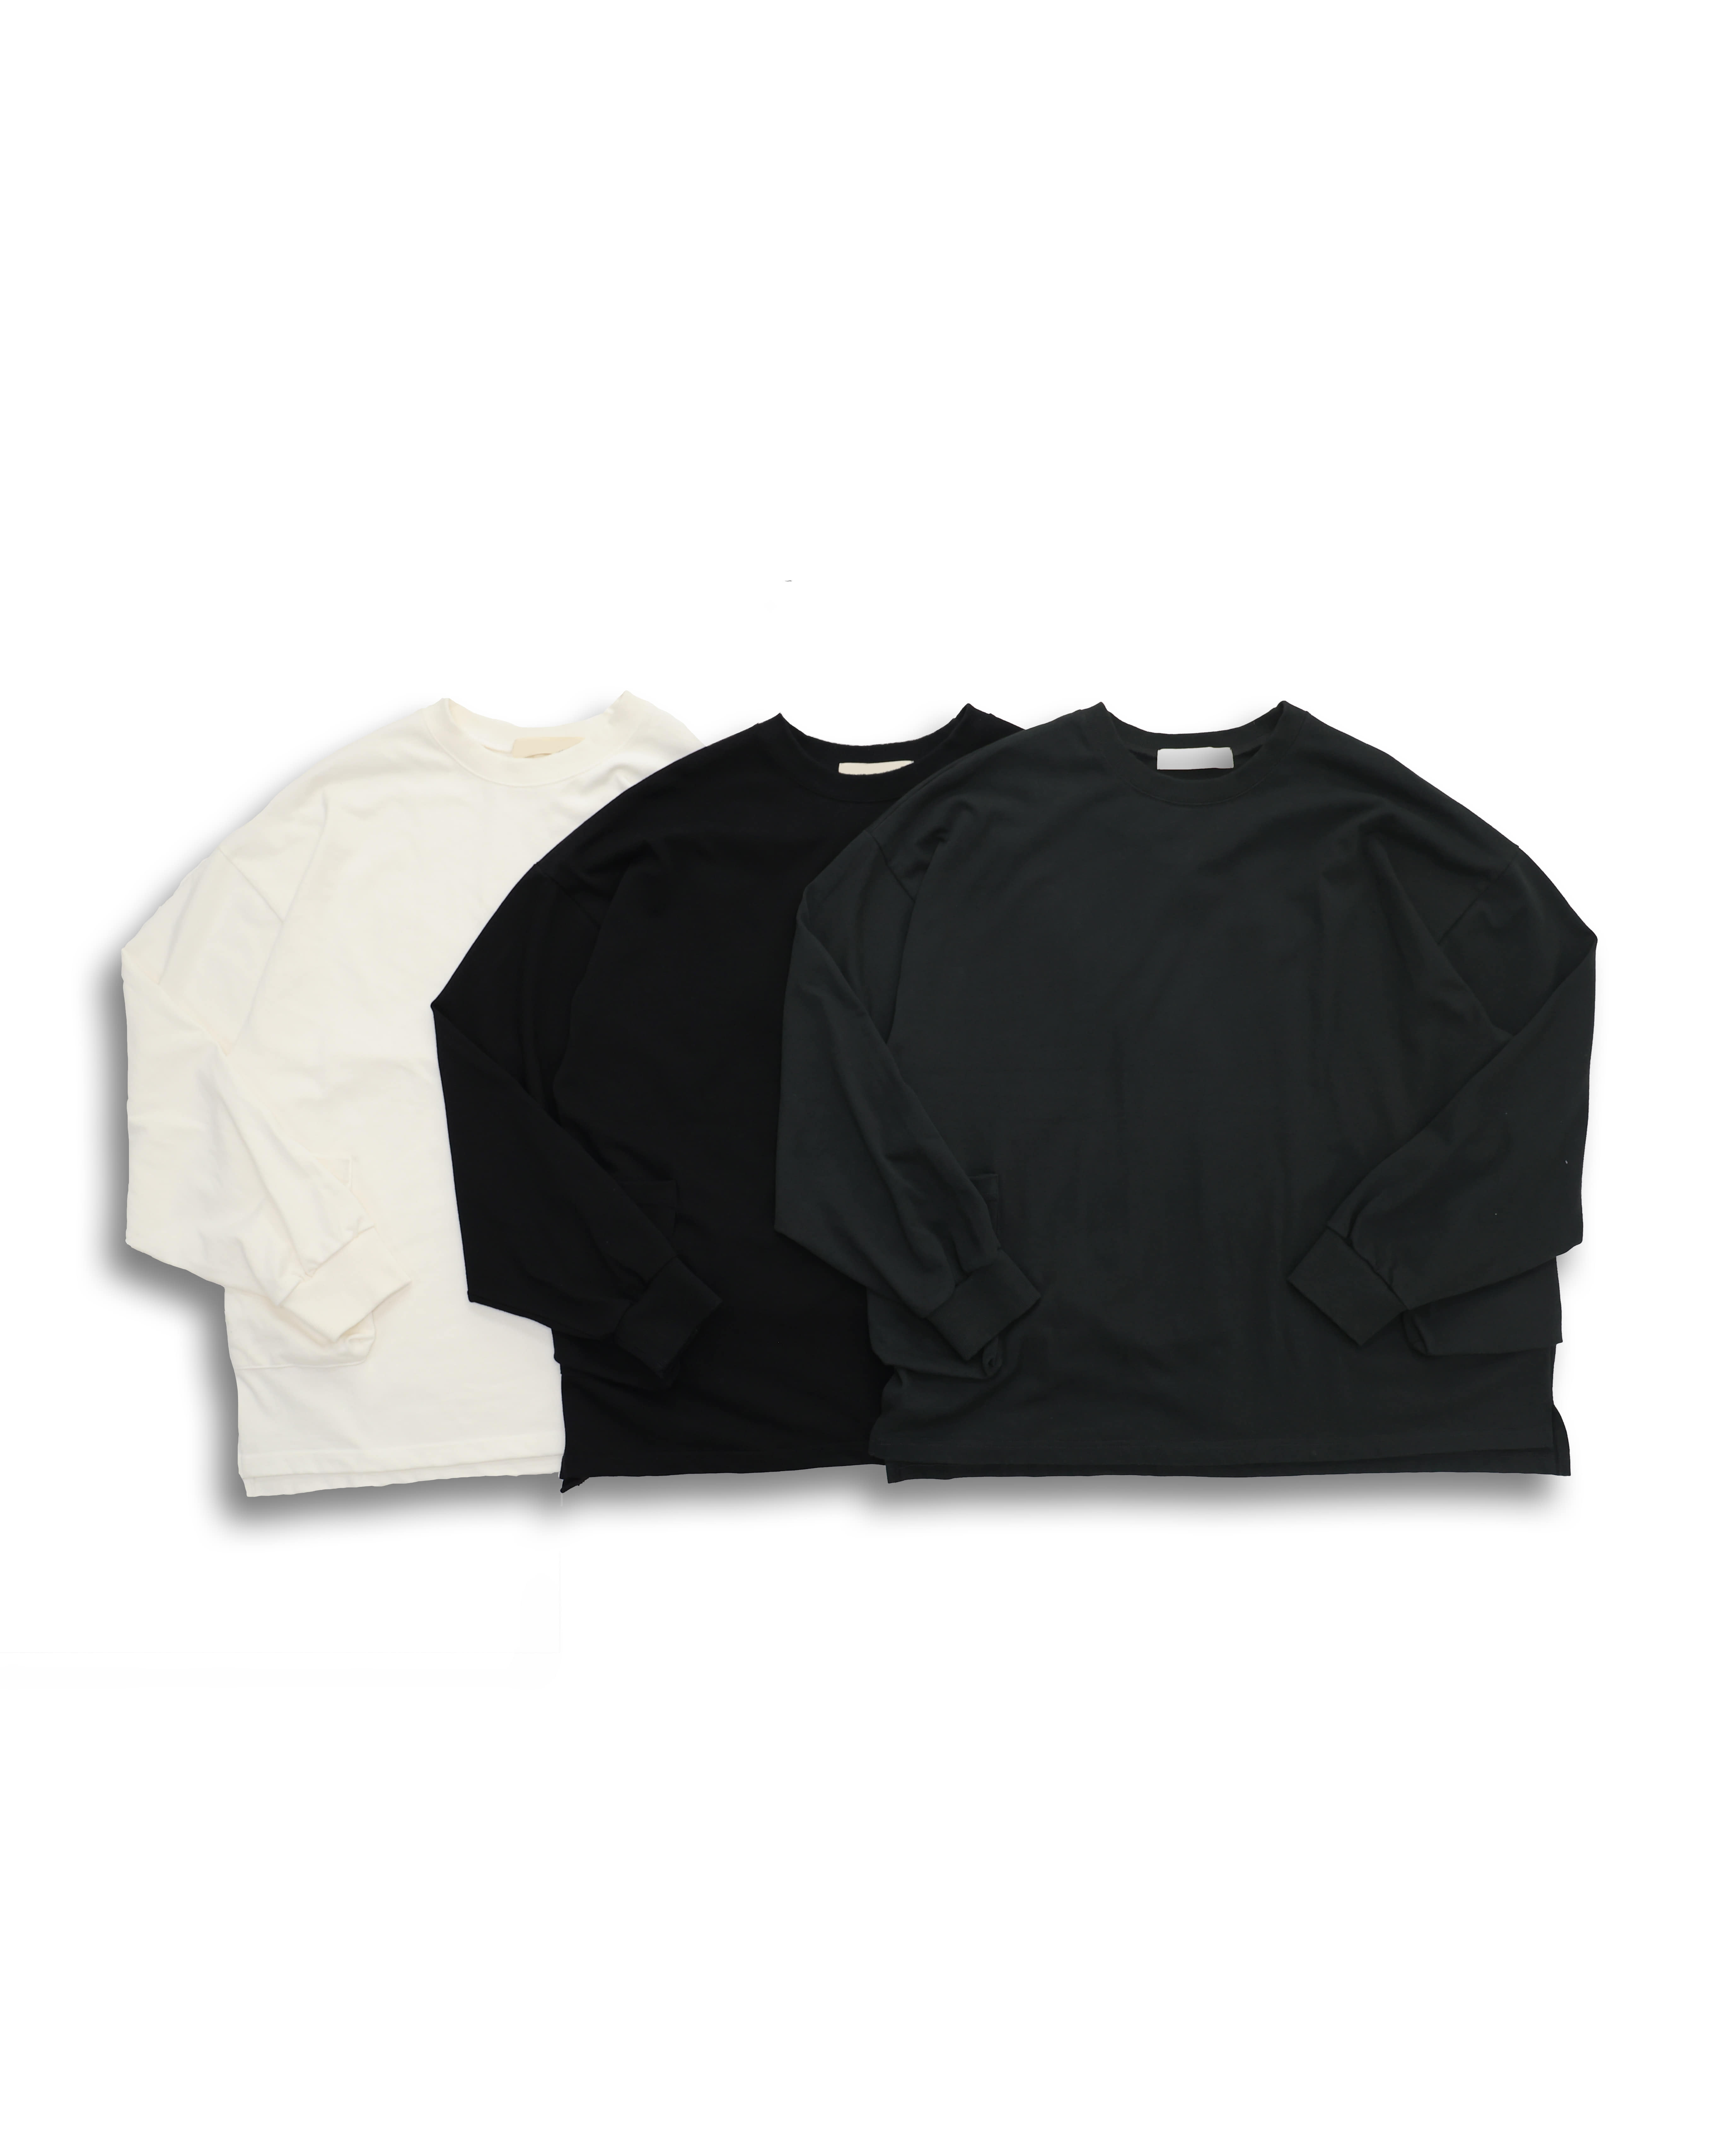 Fly Two Pocket Long Sleeves (Black/Charcoal/Ivory)